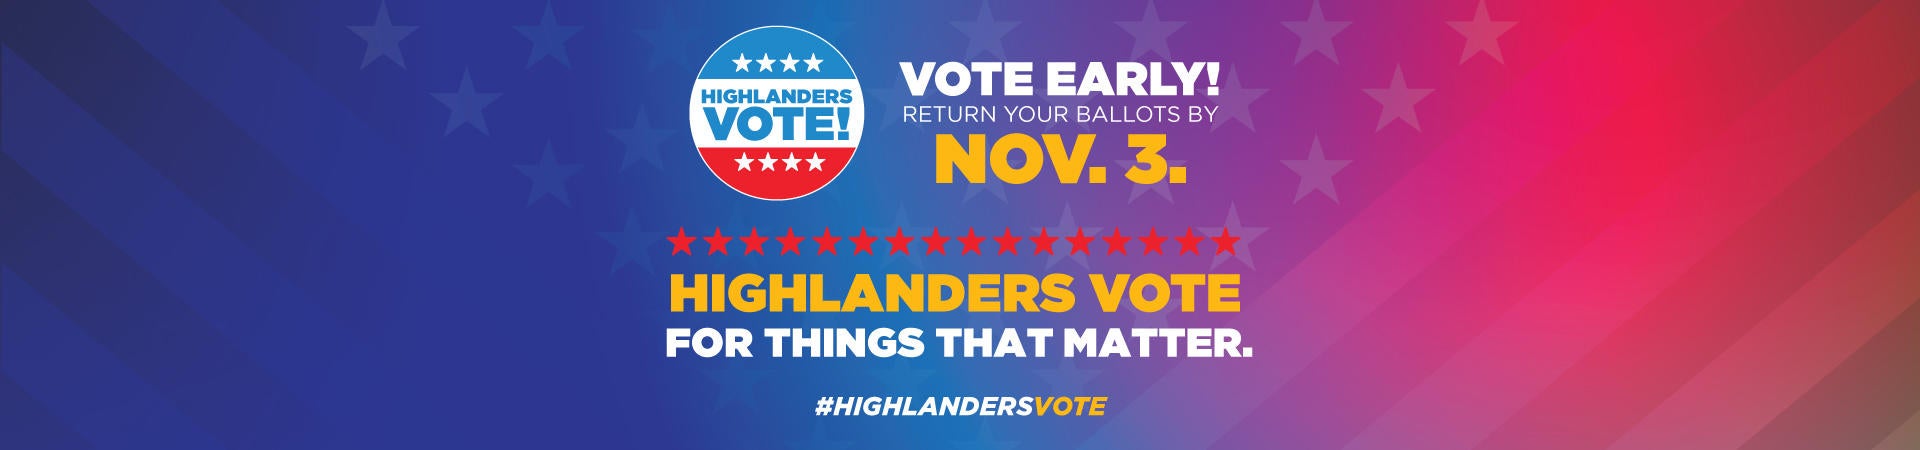 Red, white and blue Highlanders Votes logo with the tagline, Vote Early! Return your ballots by Nov. 3., HIGHLANDERS VOTE for things that matter., #HighlandersVOTE